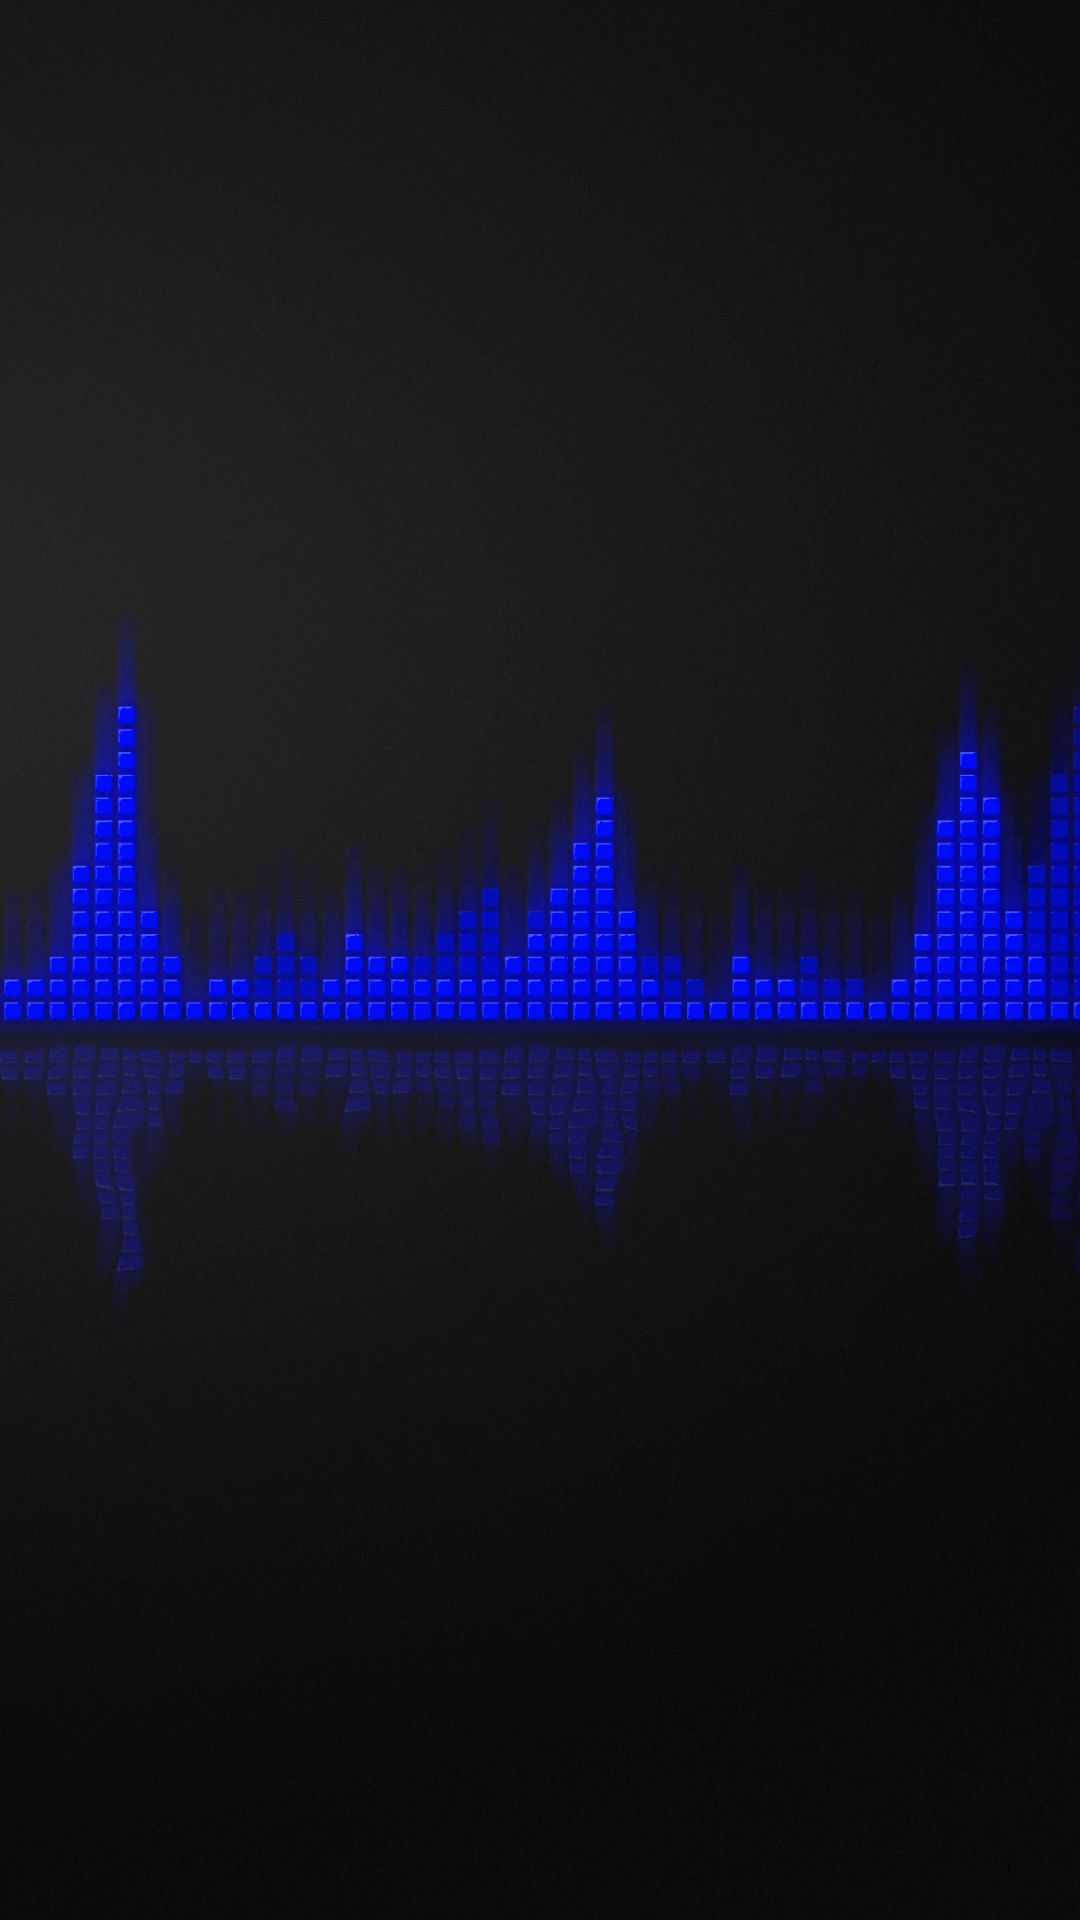 Free HD abstract, black, blue, equalizer, music